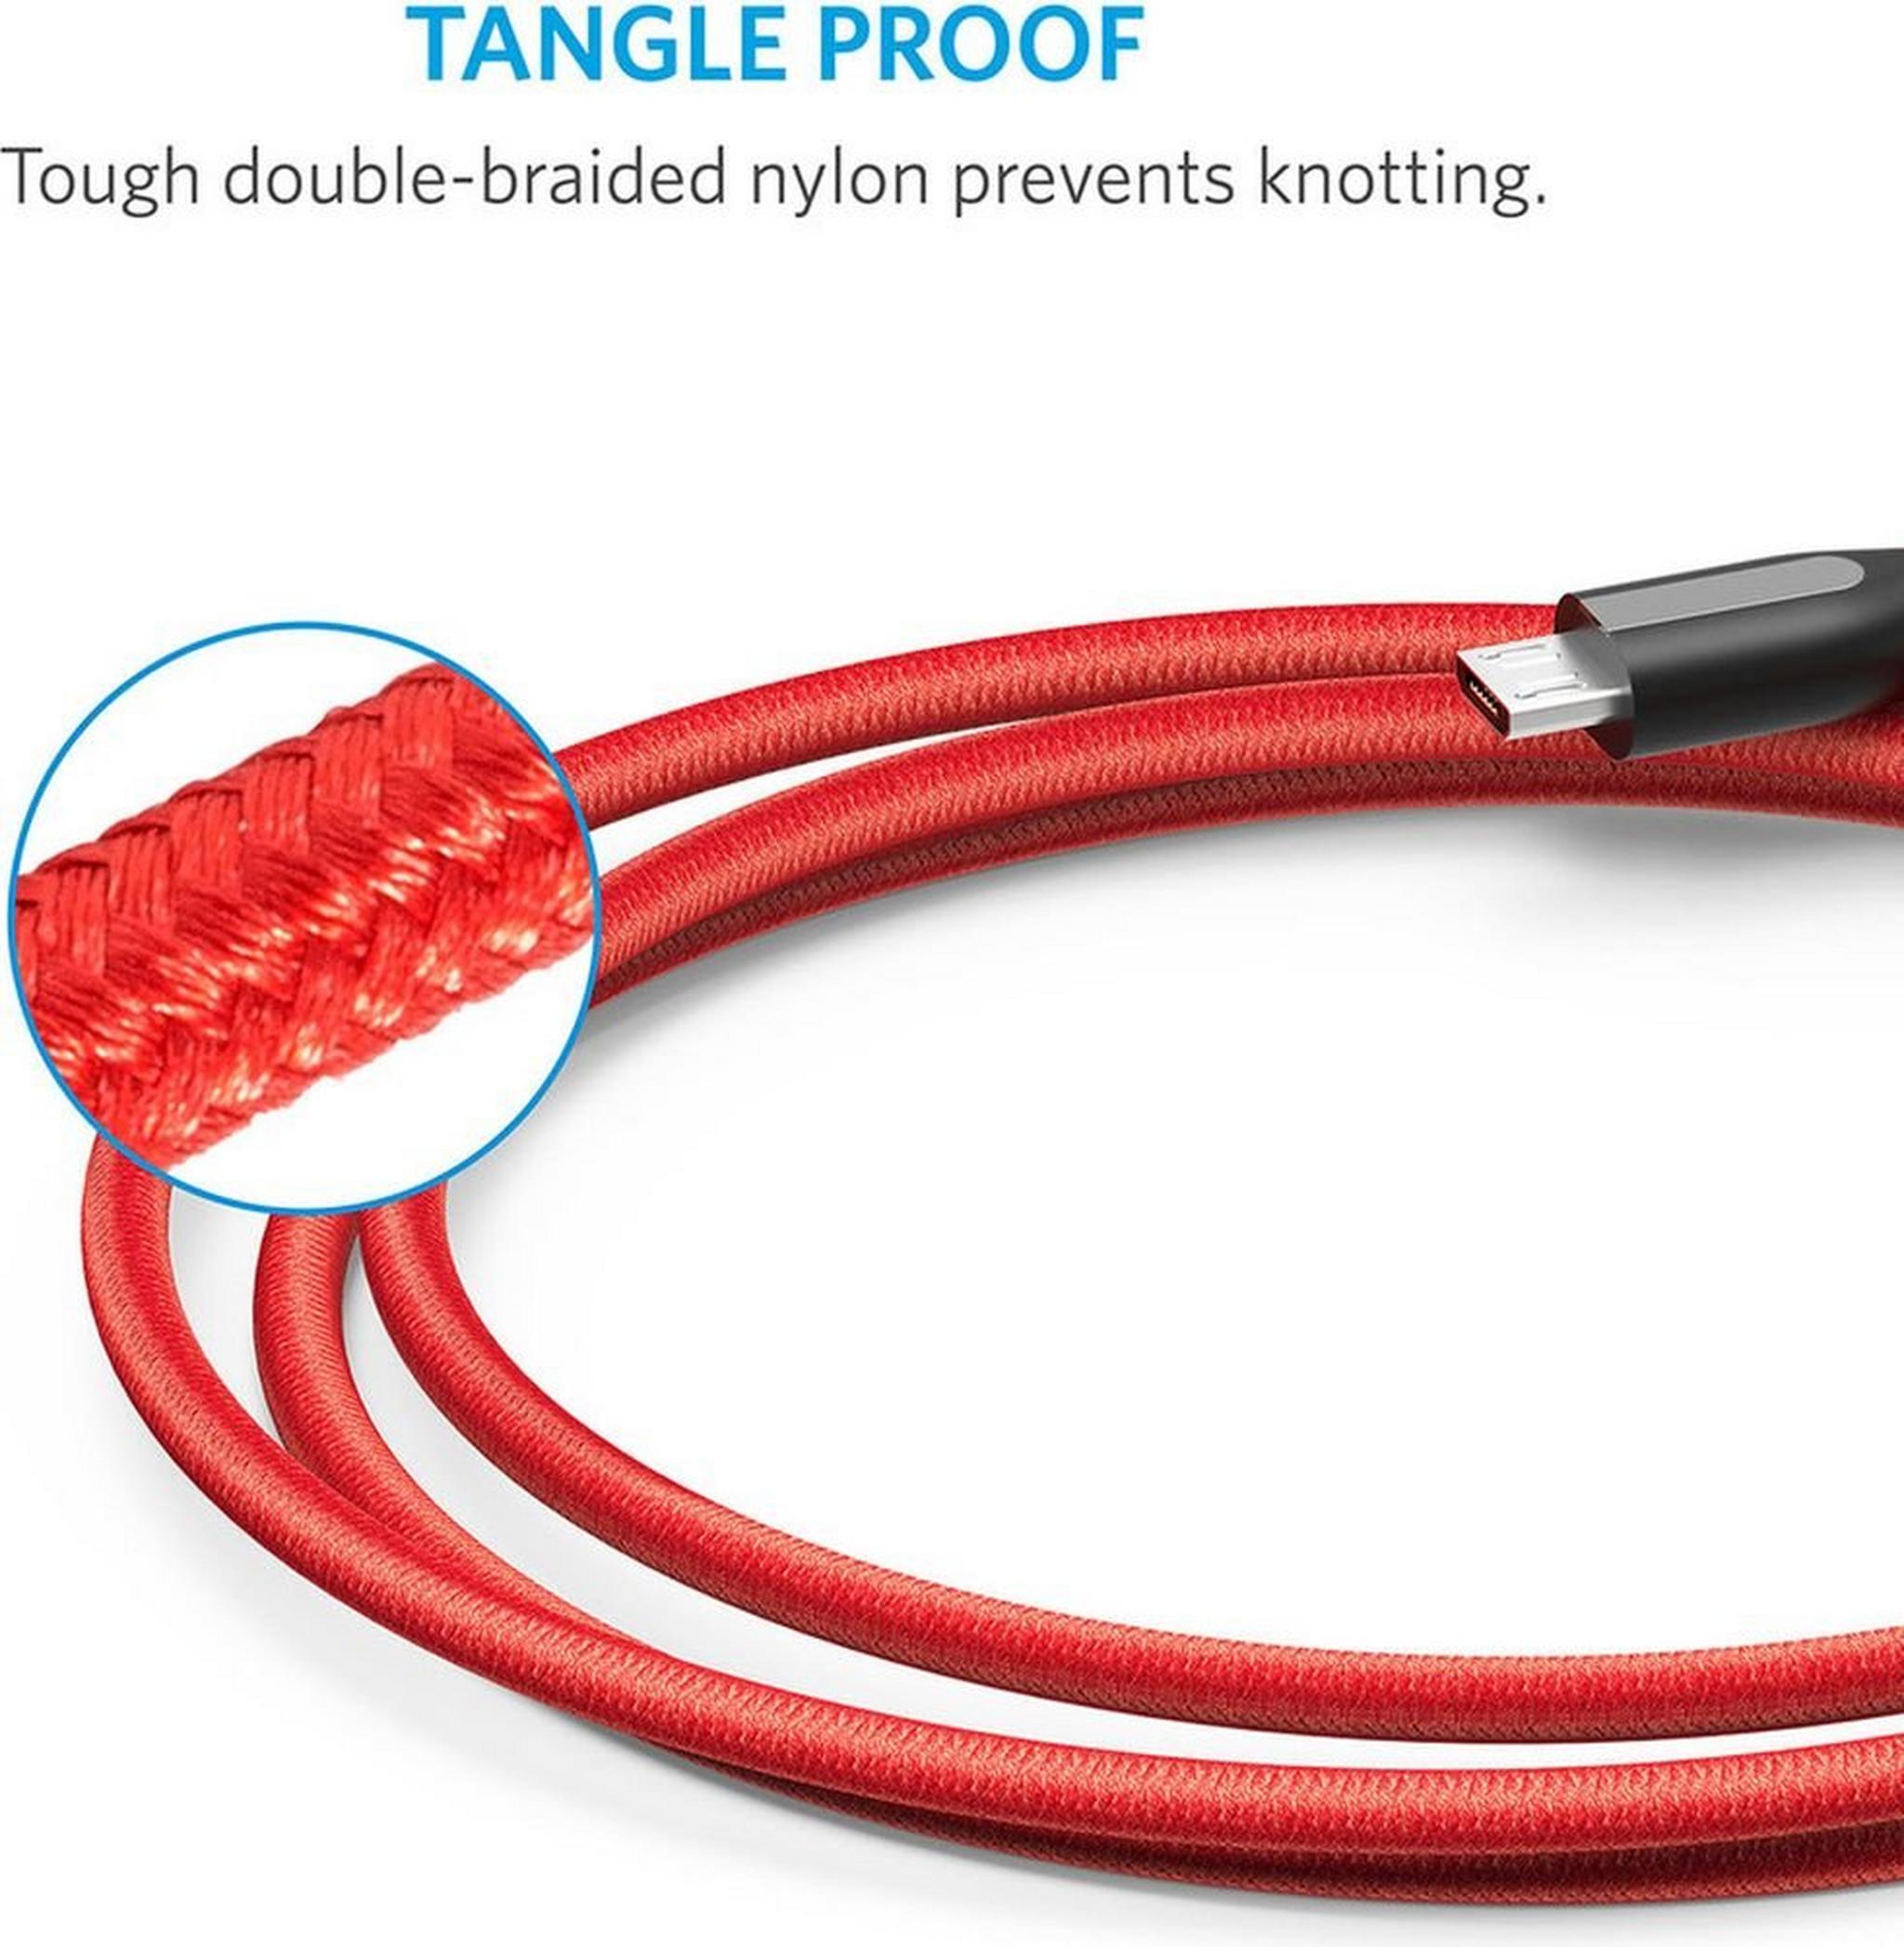 Anker PowerLine Micro USB Nylon Braided Cable 1.8M - Red